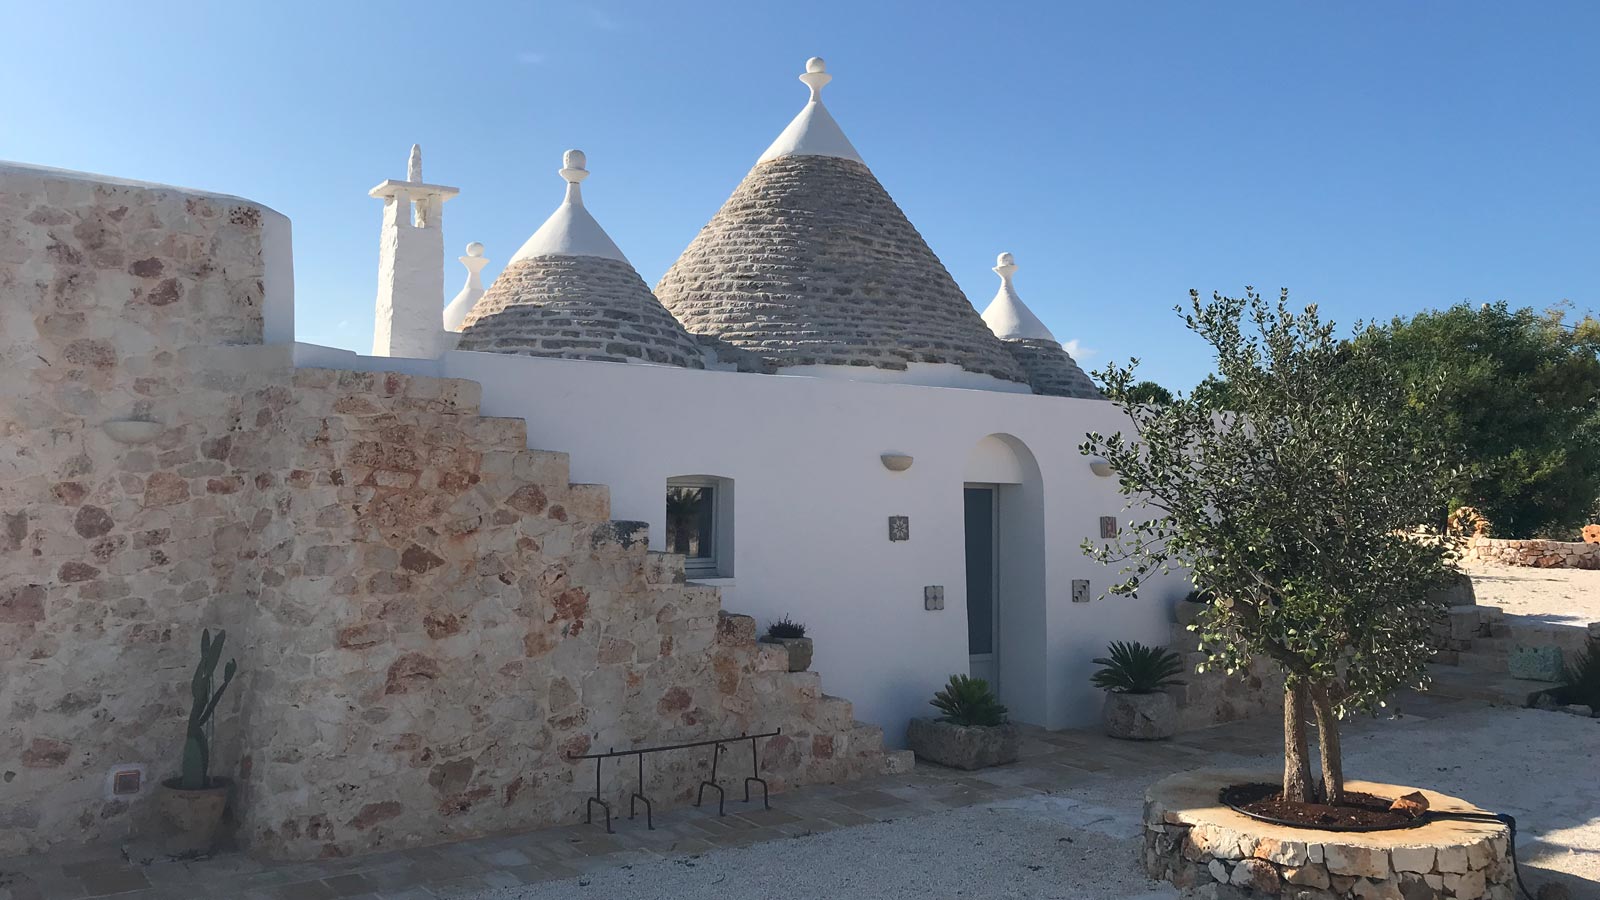 About Trull San Paolo, luxury holiday accommodation in Puglia